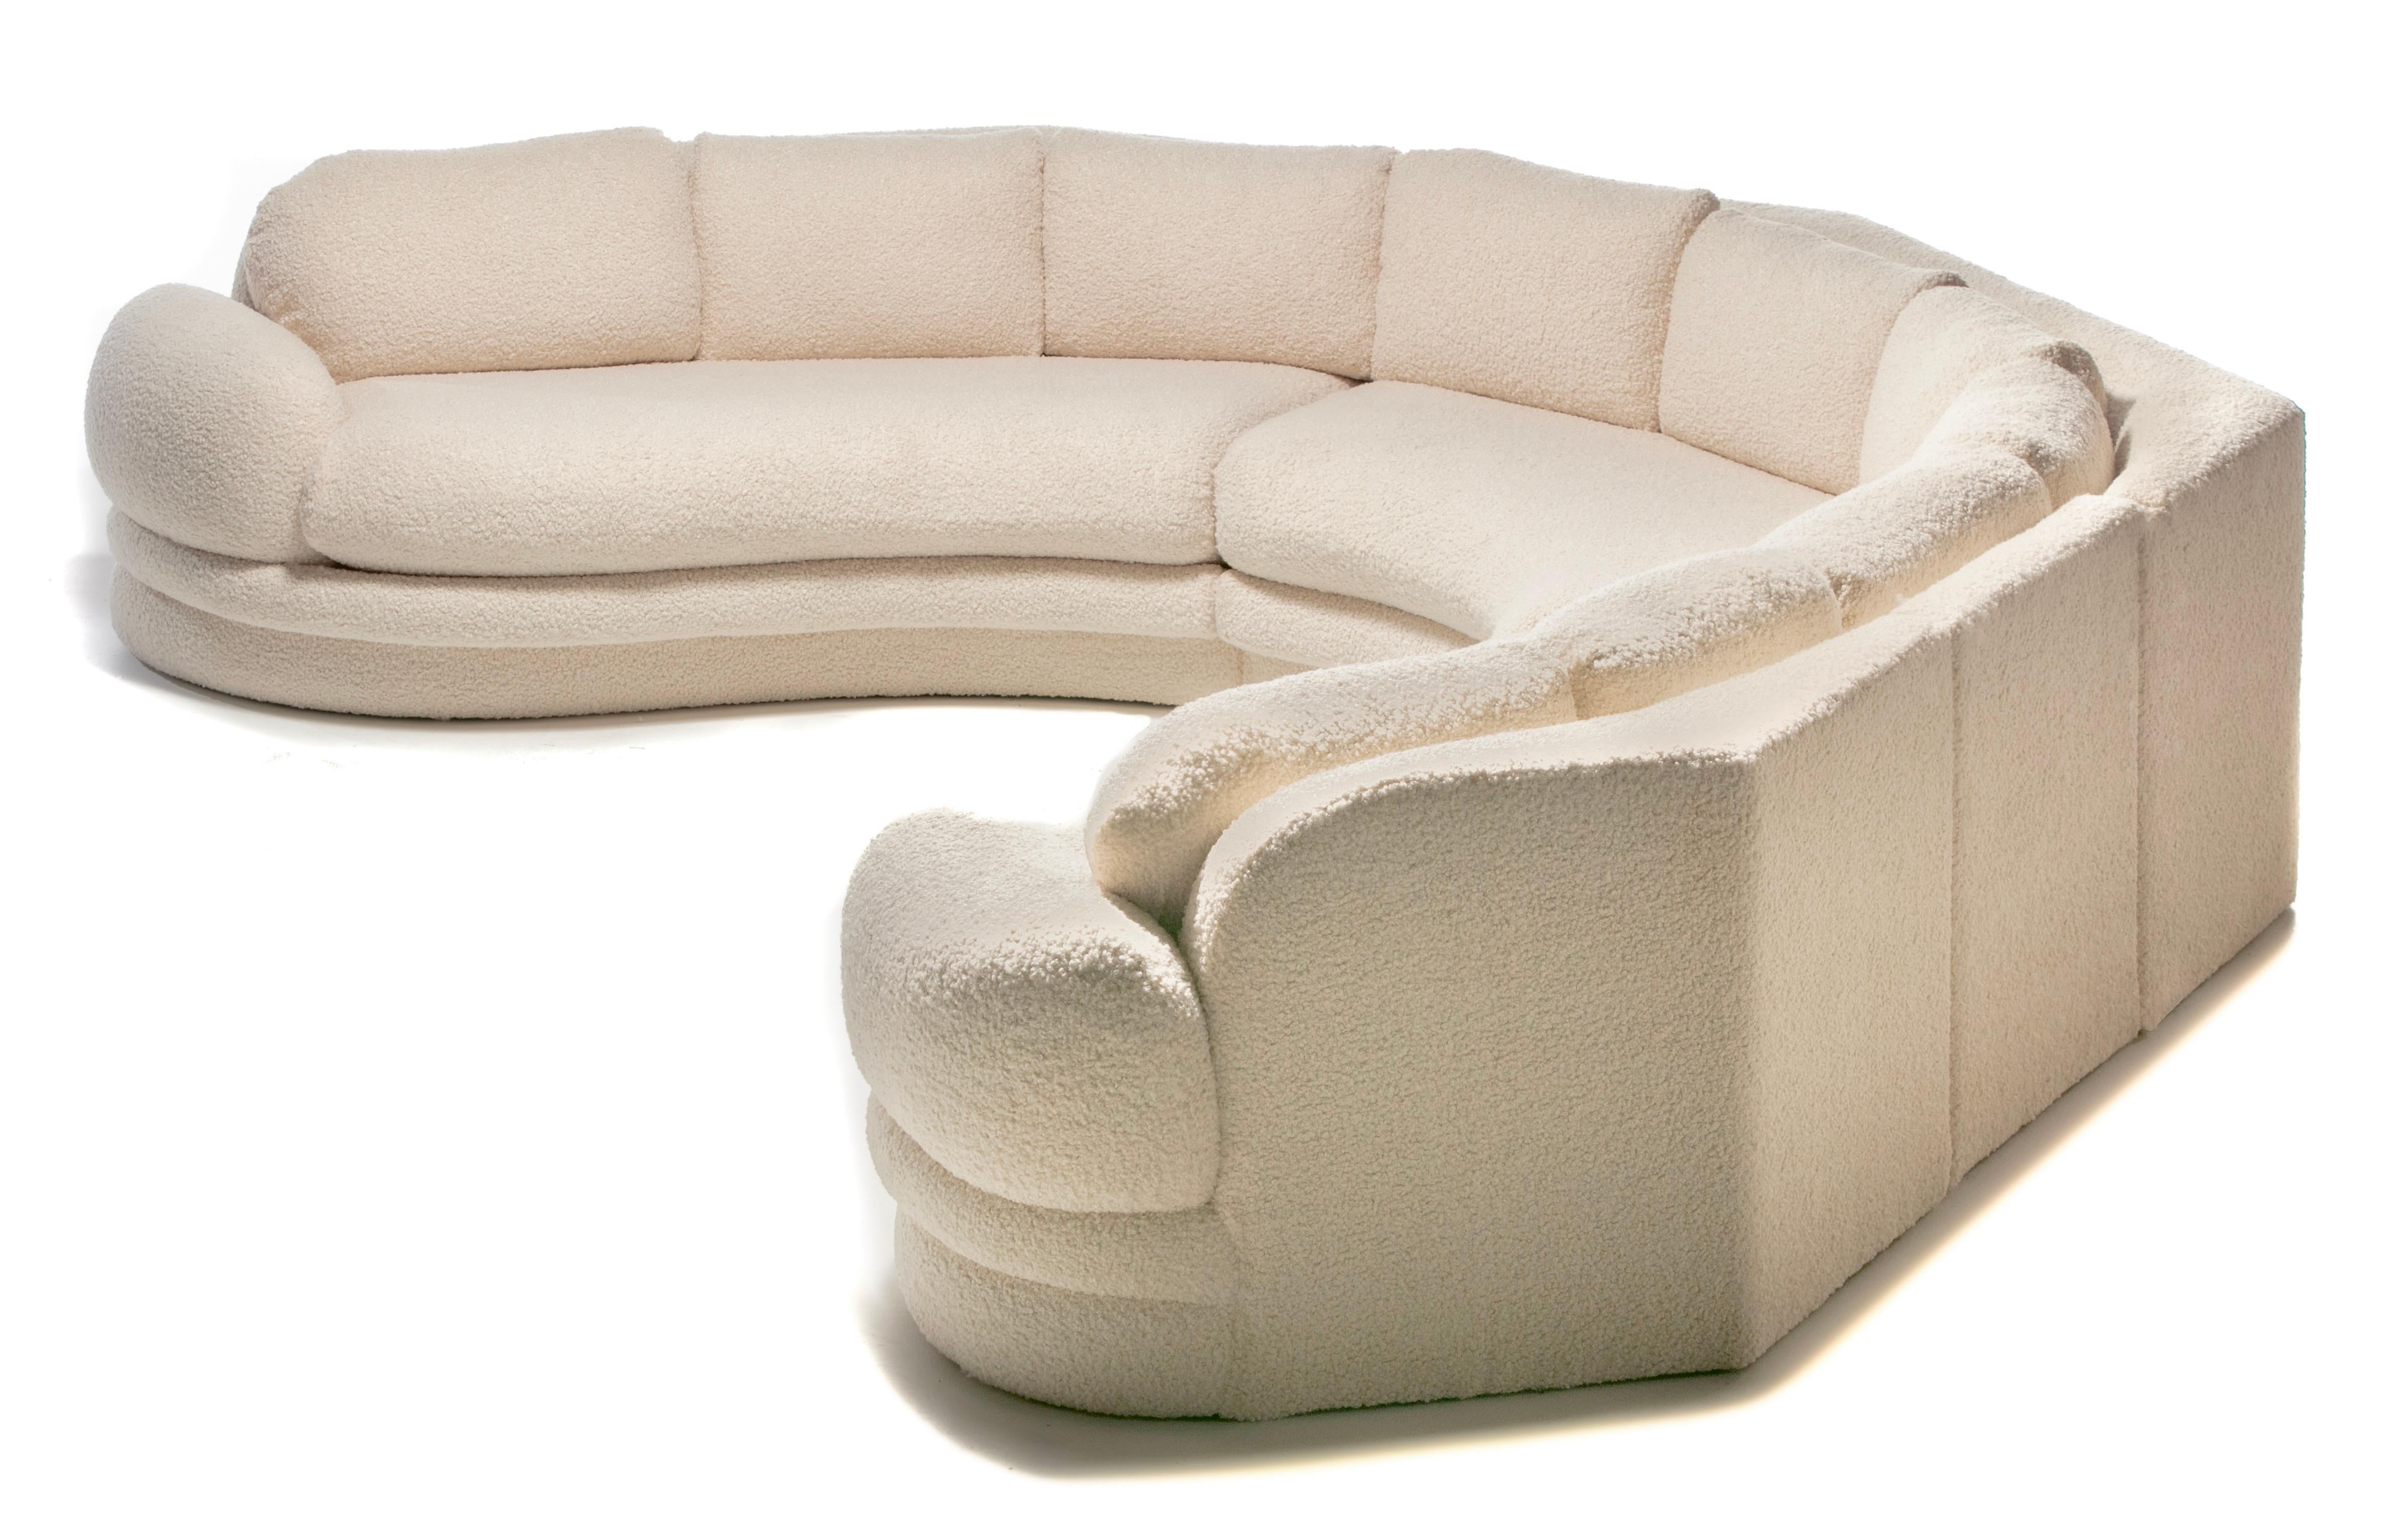 Post Modern 1990s Preview Sectional Sofa in Plush Ivory White Bouclé In Good Condition For Sale In Saint Louis, MO